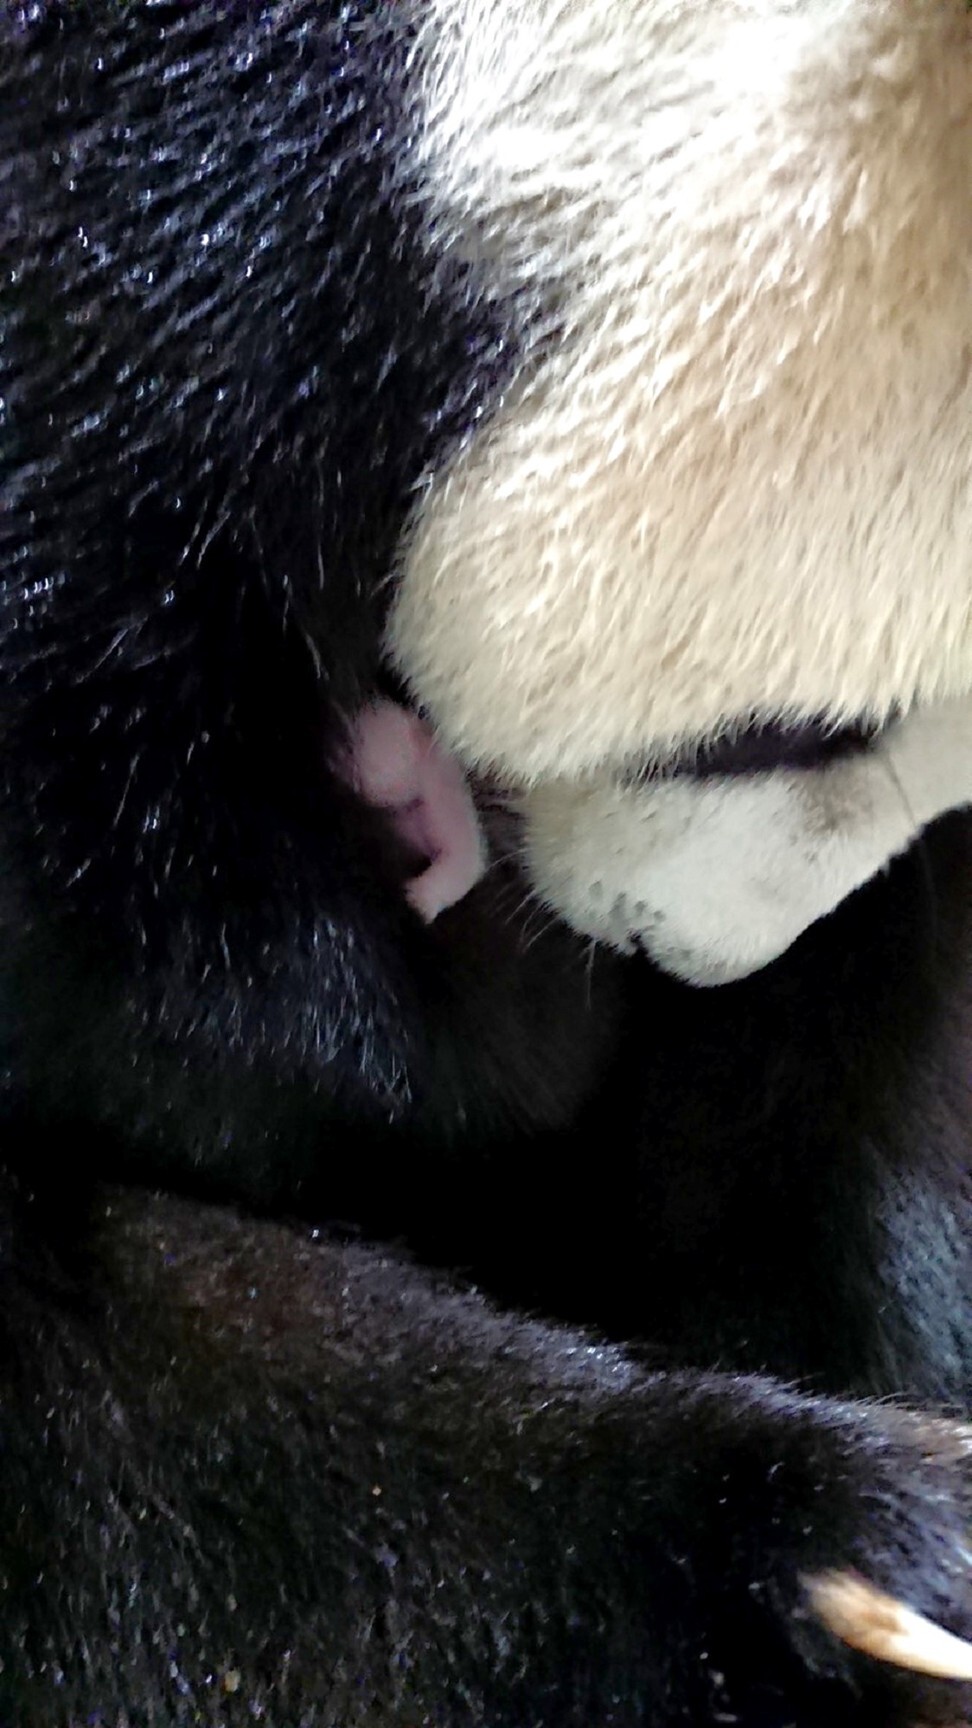 Giant panda Yuan Yuan holds the unnamed baby cub in her mouth after giving birth on Sunday, June 28. Photo: EPA-EFE/Taipei Zoo